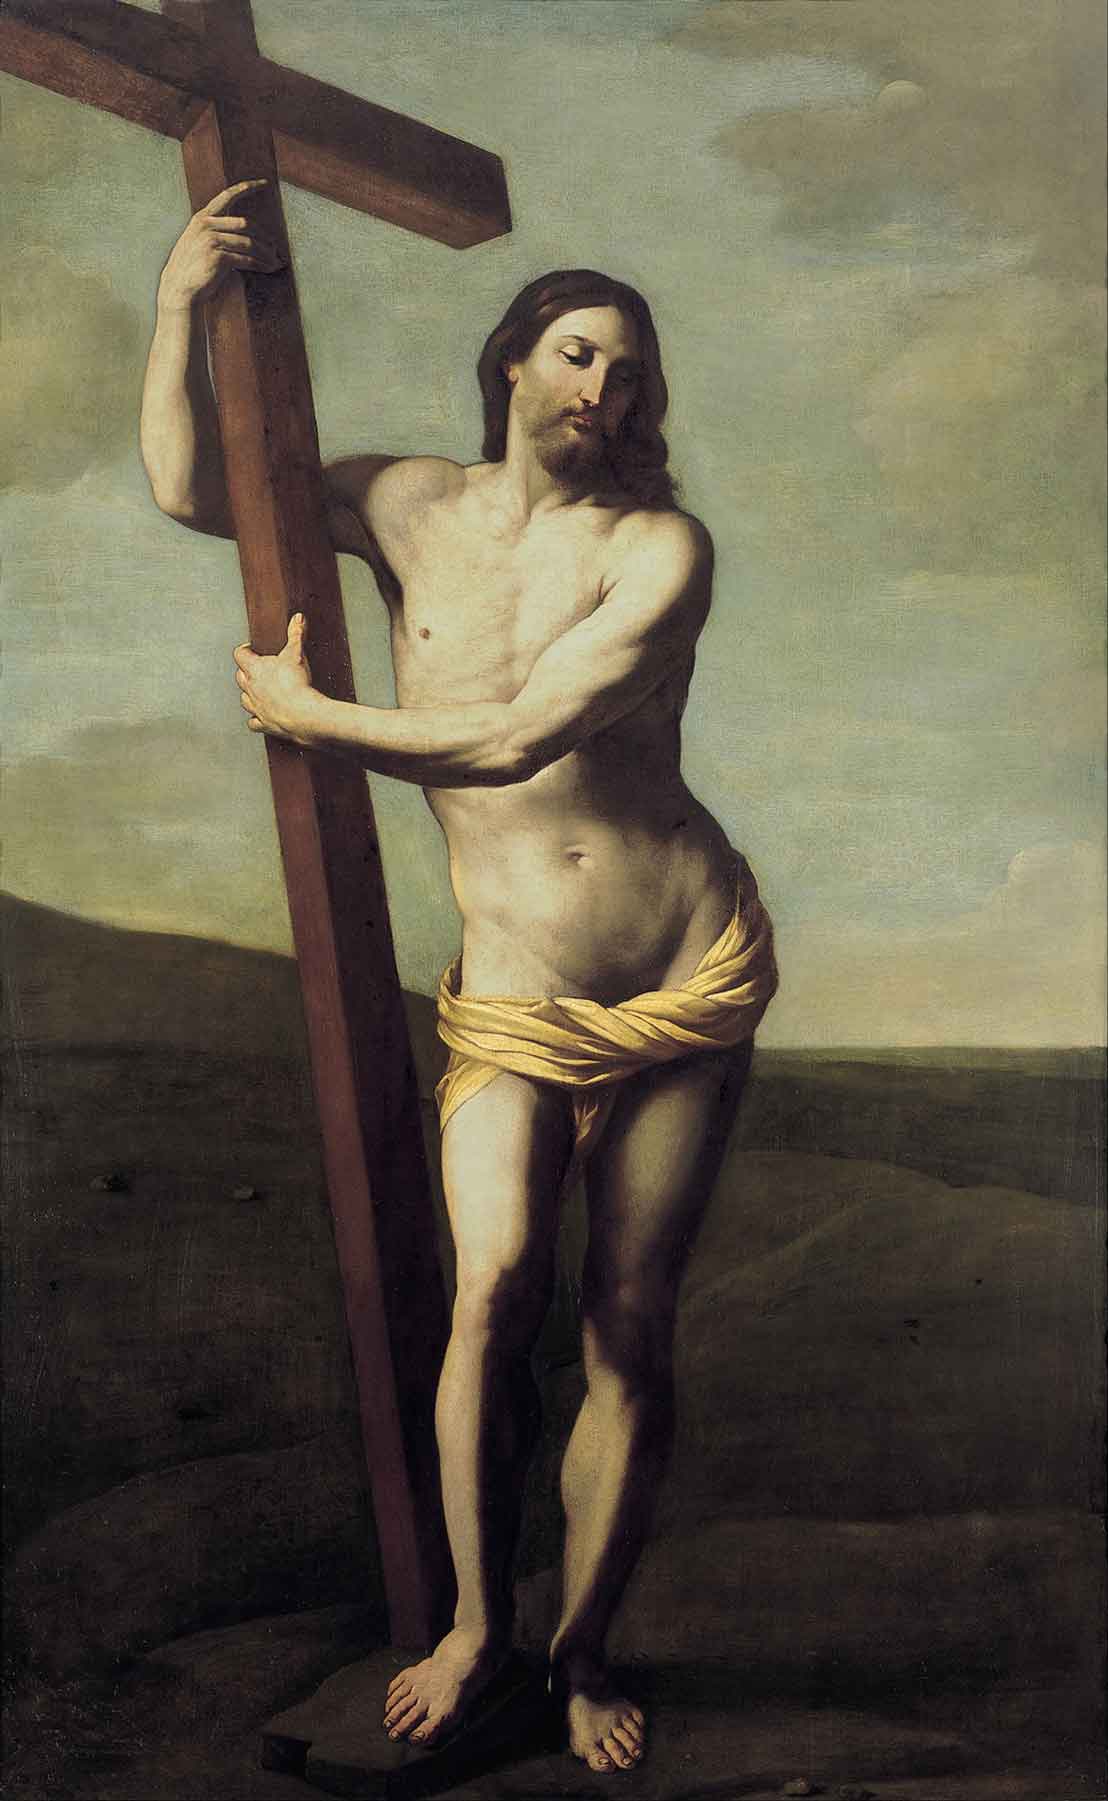 Jesus Christ with the cross